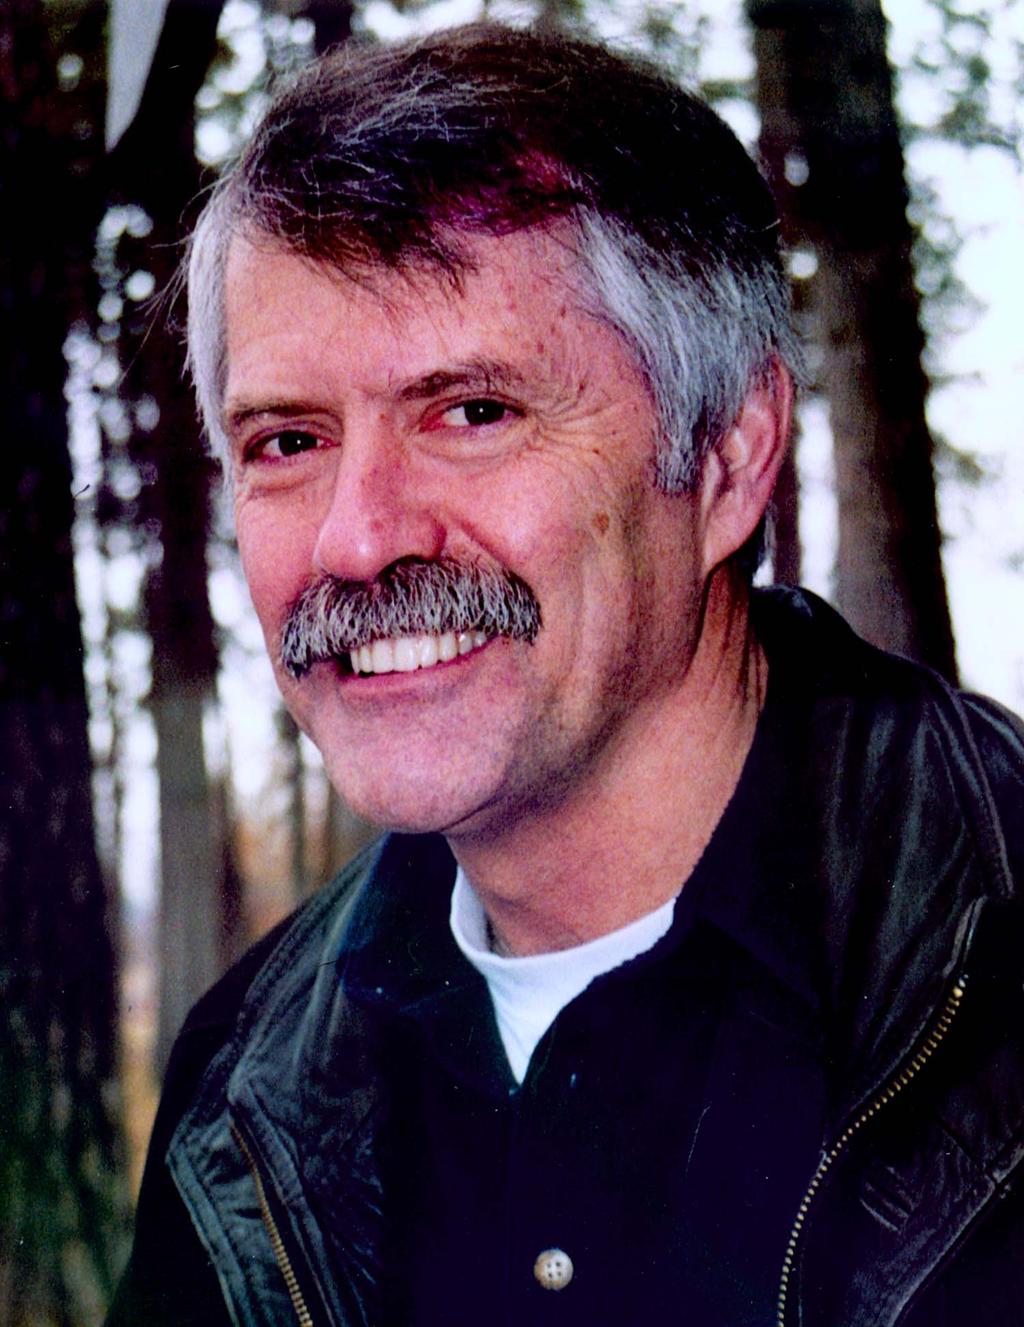 Chris Crutcher Born: July 17, 1946 in Dayton, Ohio Parents: WWII bomber pilot and homemaker Grew up In: Cascade Idaho Education: BA in Psychology and Sociology from Eastern Washington State College